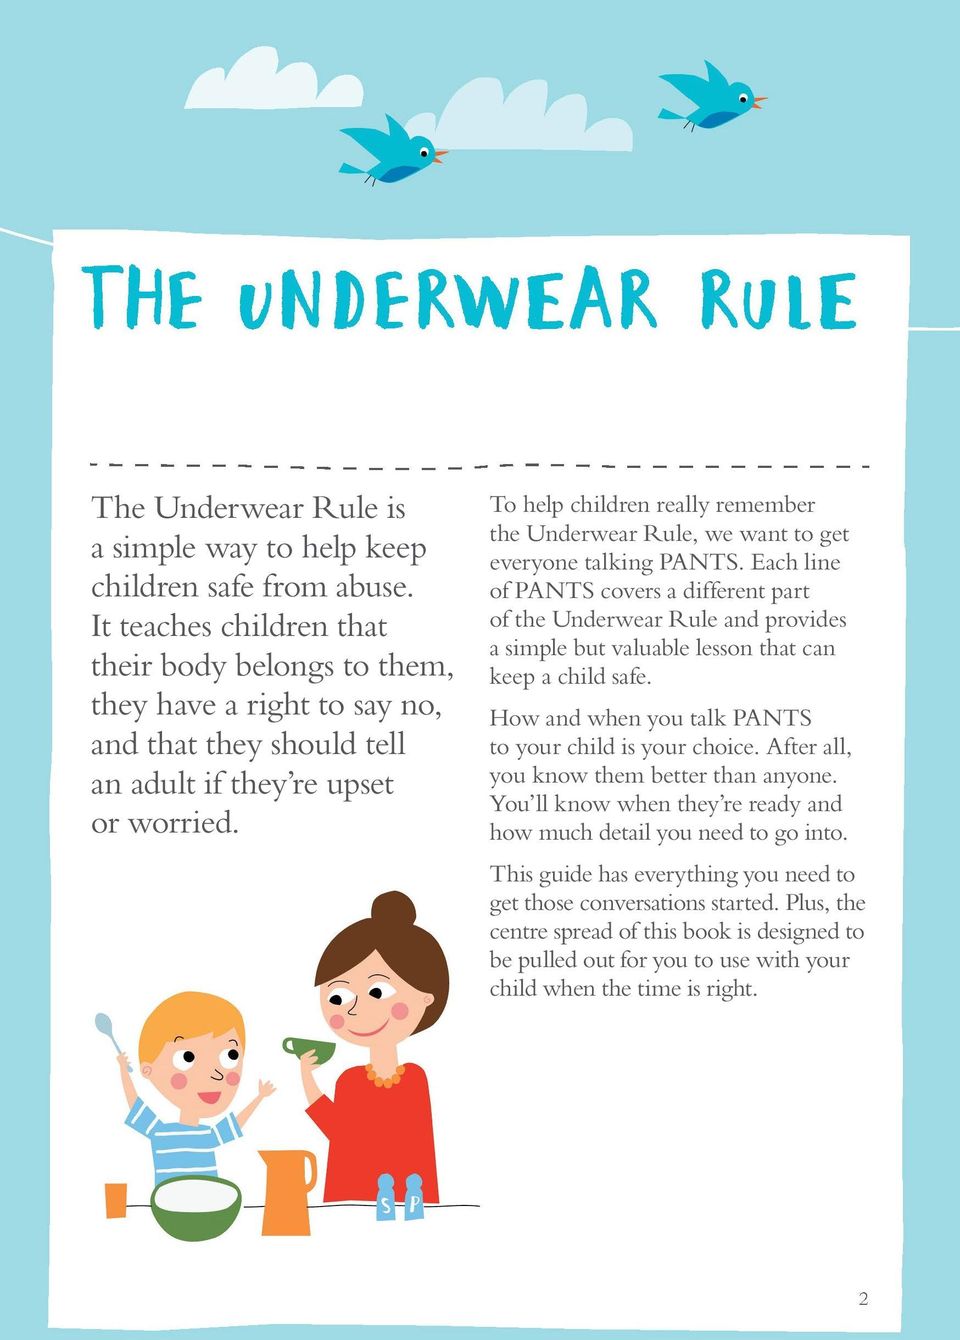 To help children really remember the Underwear Rule, we want to get everyone talking PANTS.